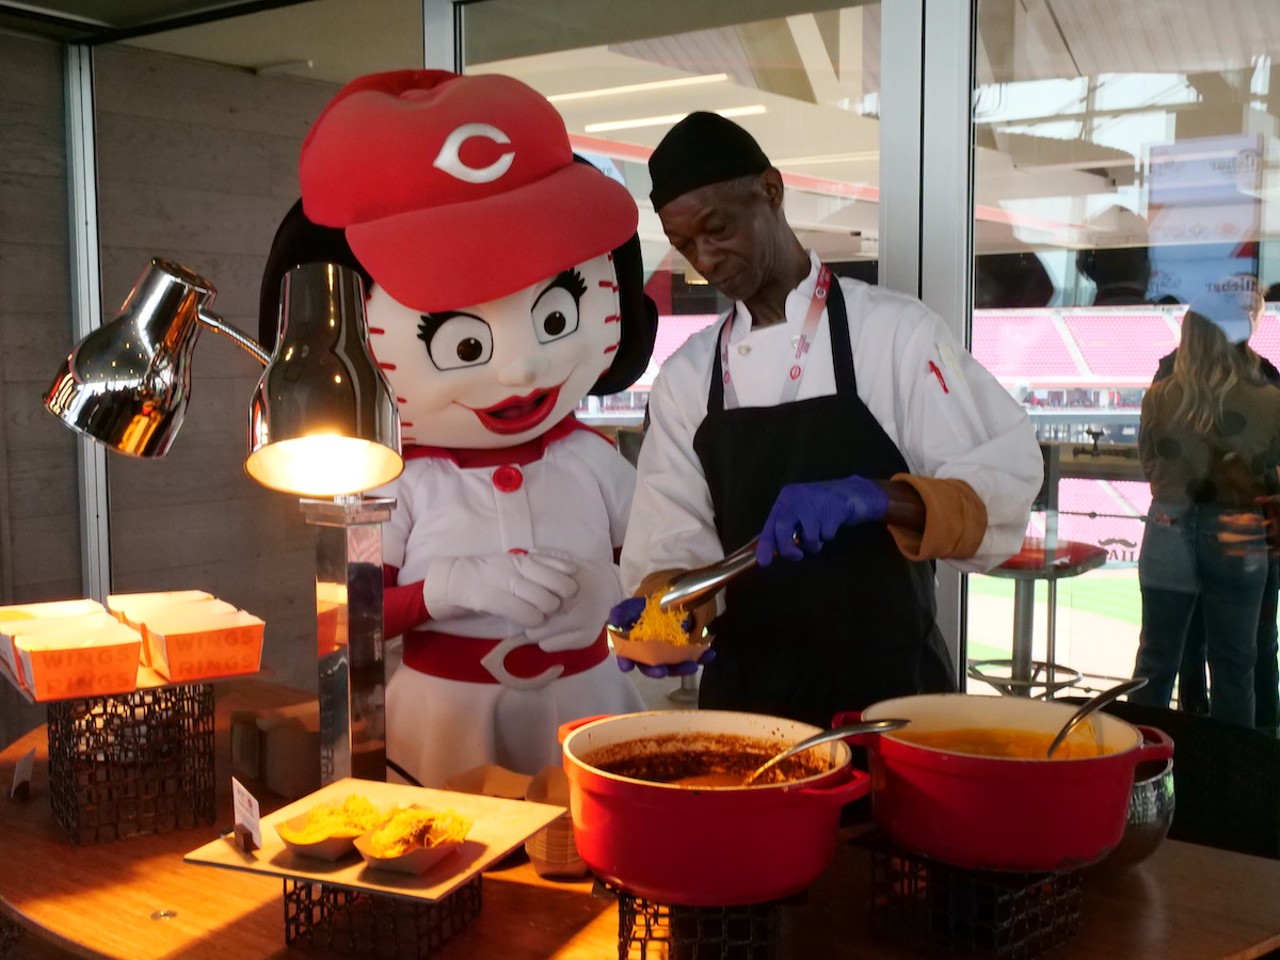 Catch a Reds Game and Chow Down on the New Eats
100 Joe Nuxhall Way, The Banks
Great American Ball Park debuted a slate of new snacks for the 2023 season, including a Cheeseburger Frybox (hamburger topped with nacho cheese, iceberg lettuce, grilled onions, pickles and Thousand Island dressing served on French fries) and the vegetarian-friendly Curve Ball (veggie burger topped with iceberg lettuce, grilled onions, pickles and Thousand Island dressing served on a brioche bun). And that’s only some of the many new menu items you’ll find throughout the ball park. Eat up because if the Reds are losing, you’ll at least leave the ball park with a full stomach.